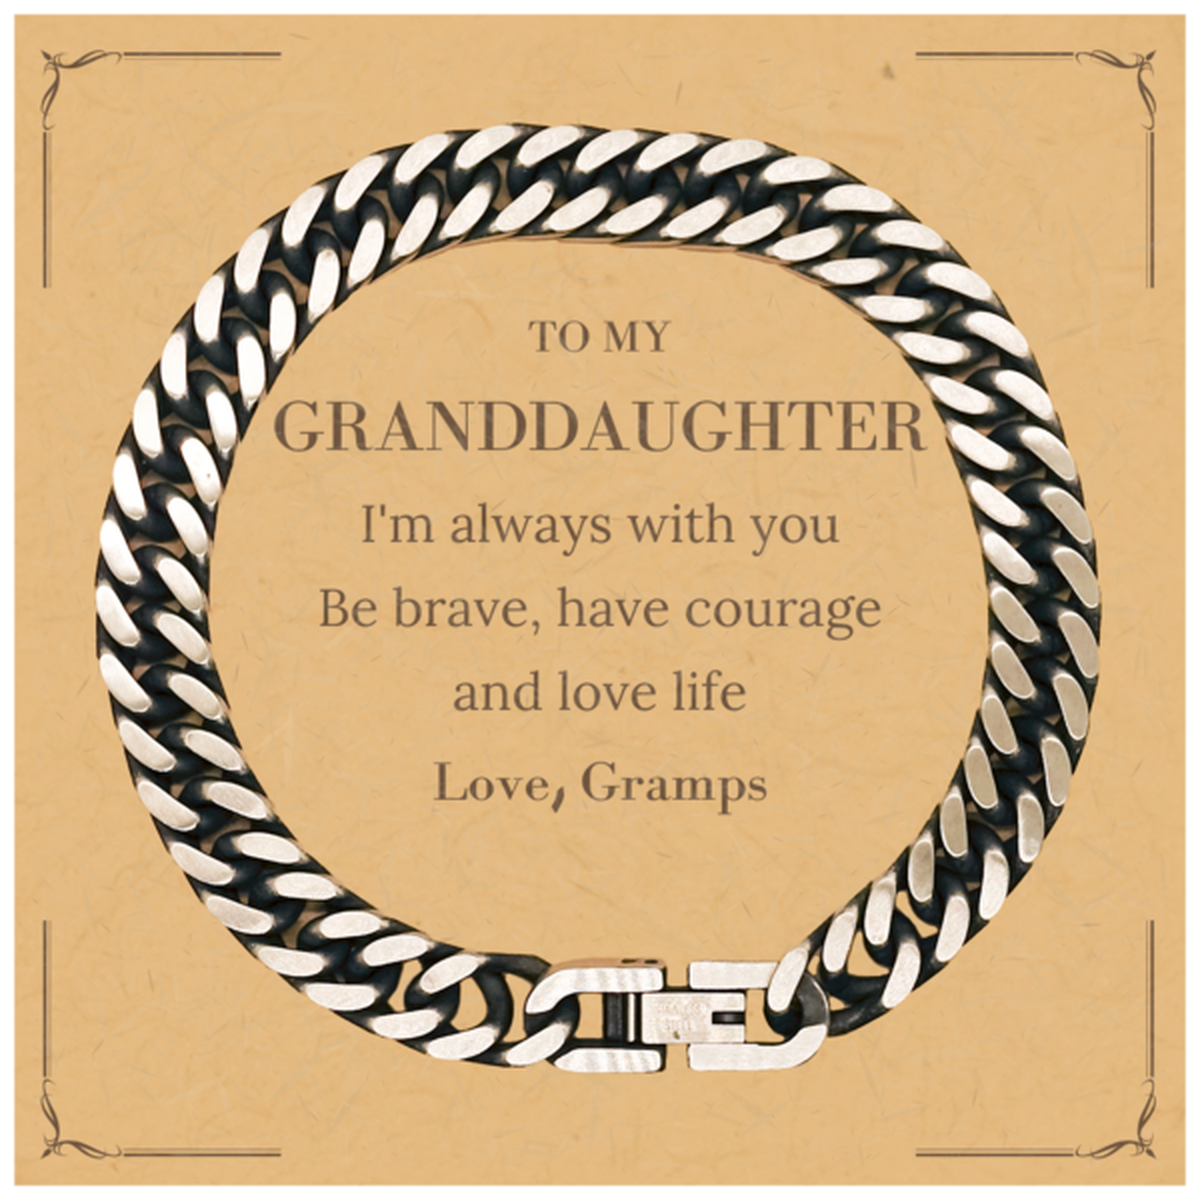 To My Granddaughter Gifts from Gramps, Unique Cuban Link Chain Bracelet Inspirational Christmas Birthday Graduation Gifts for Granddaughter I'm always with you. Be brave, have courage and love life. Love, Gramps